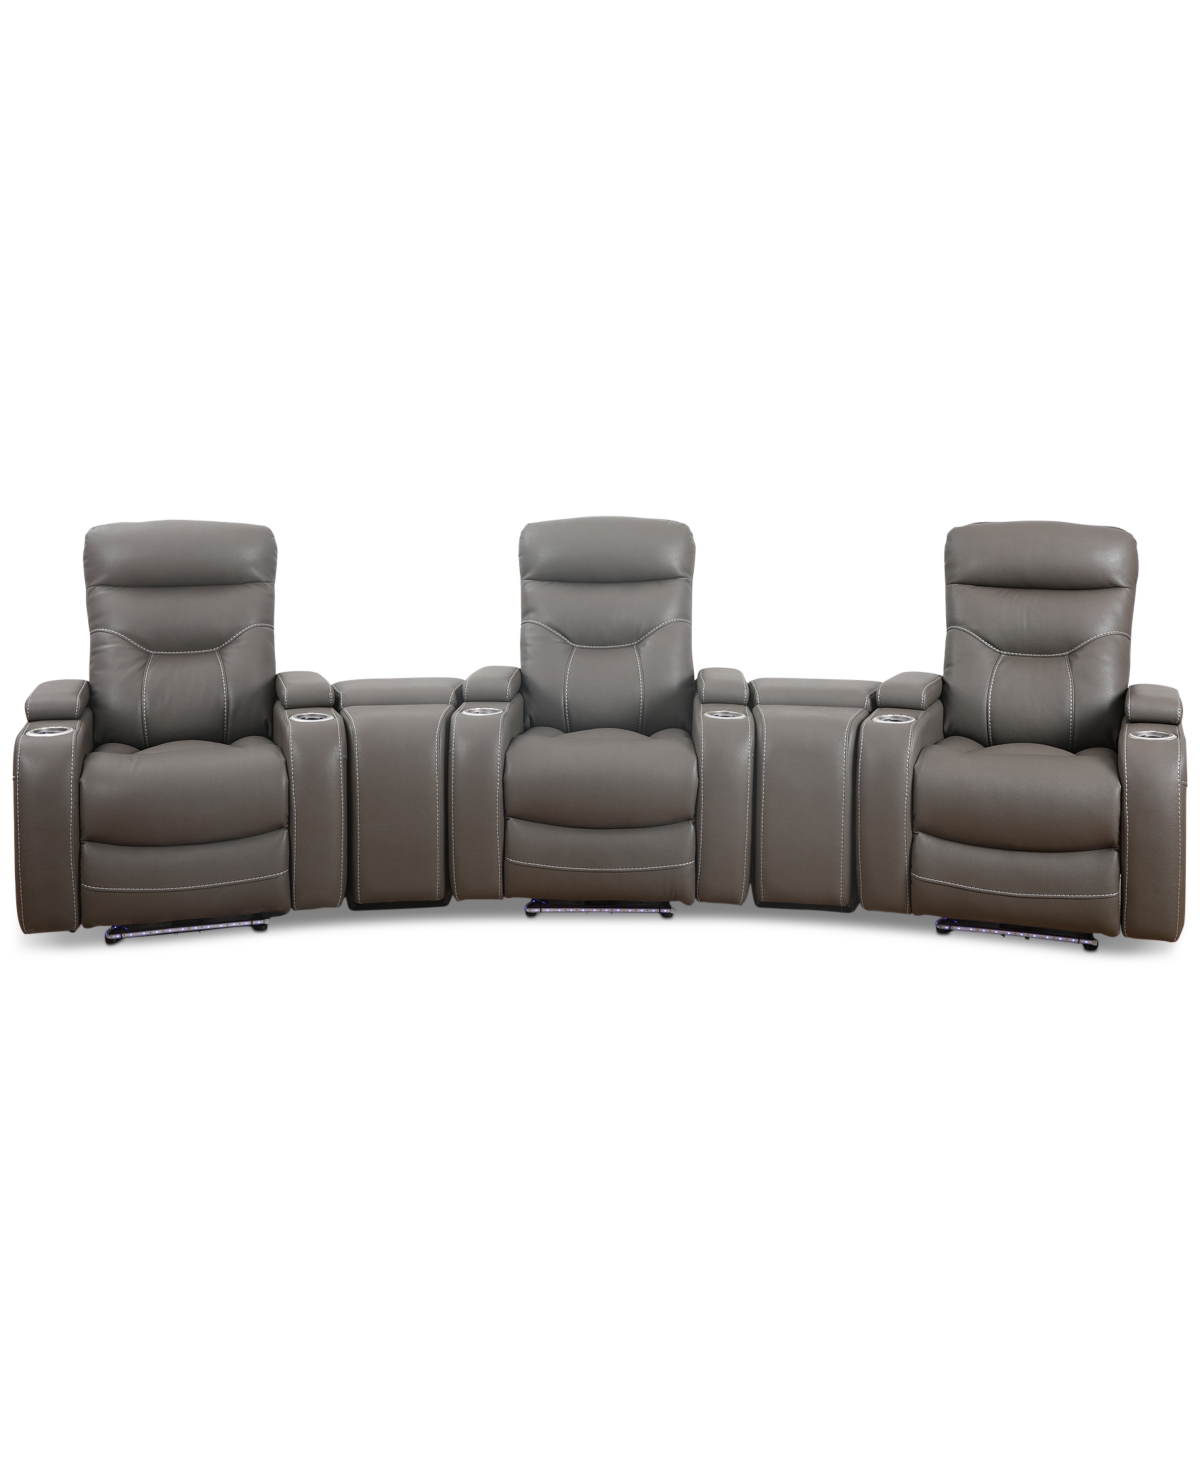 Furniture Jabarr 5-pc. Beyond Leather Theater Seating With 2 Consoles, Created For Macy's In Grey